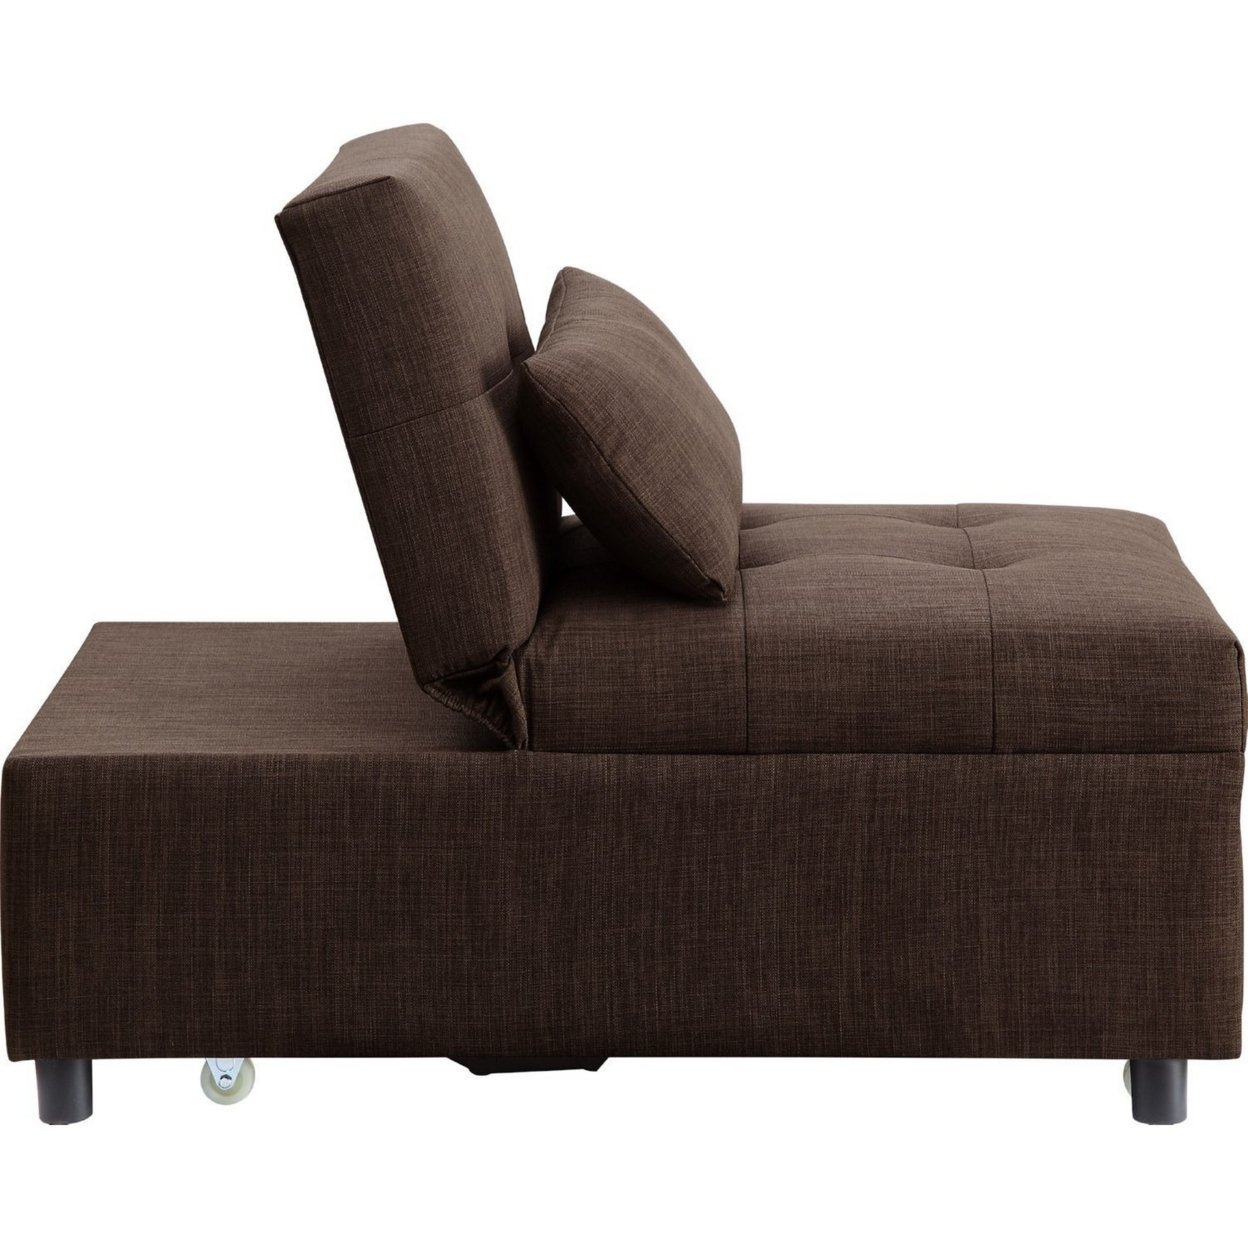 Sofa Bed With 1 Lumbar Pillow And Pull Out Sleeper, Brown- Saltoro Sherpi